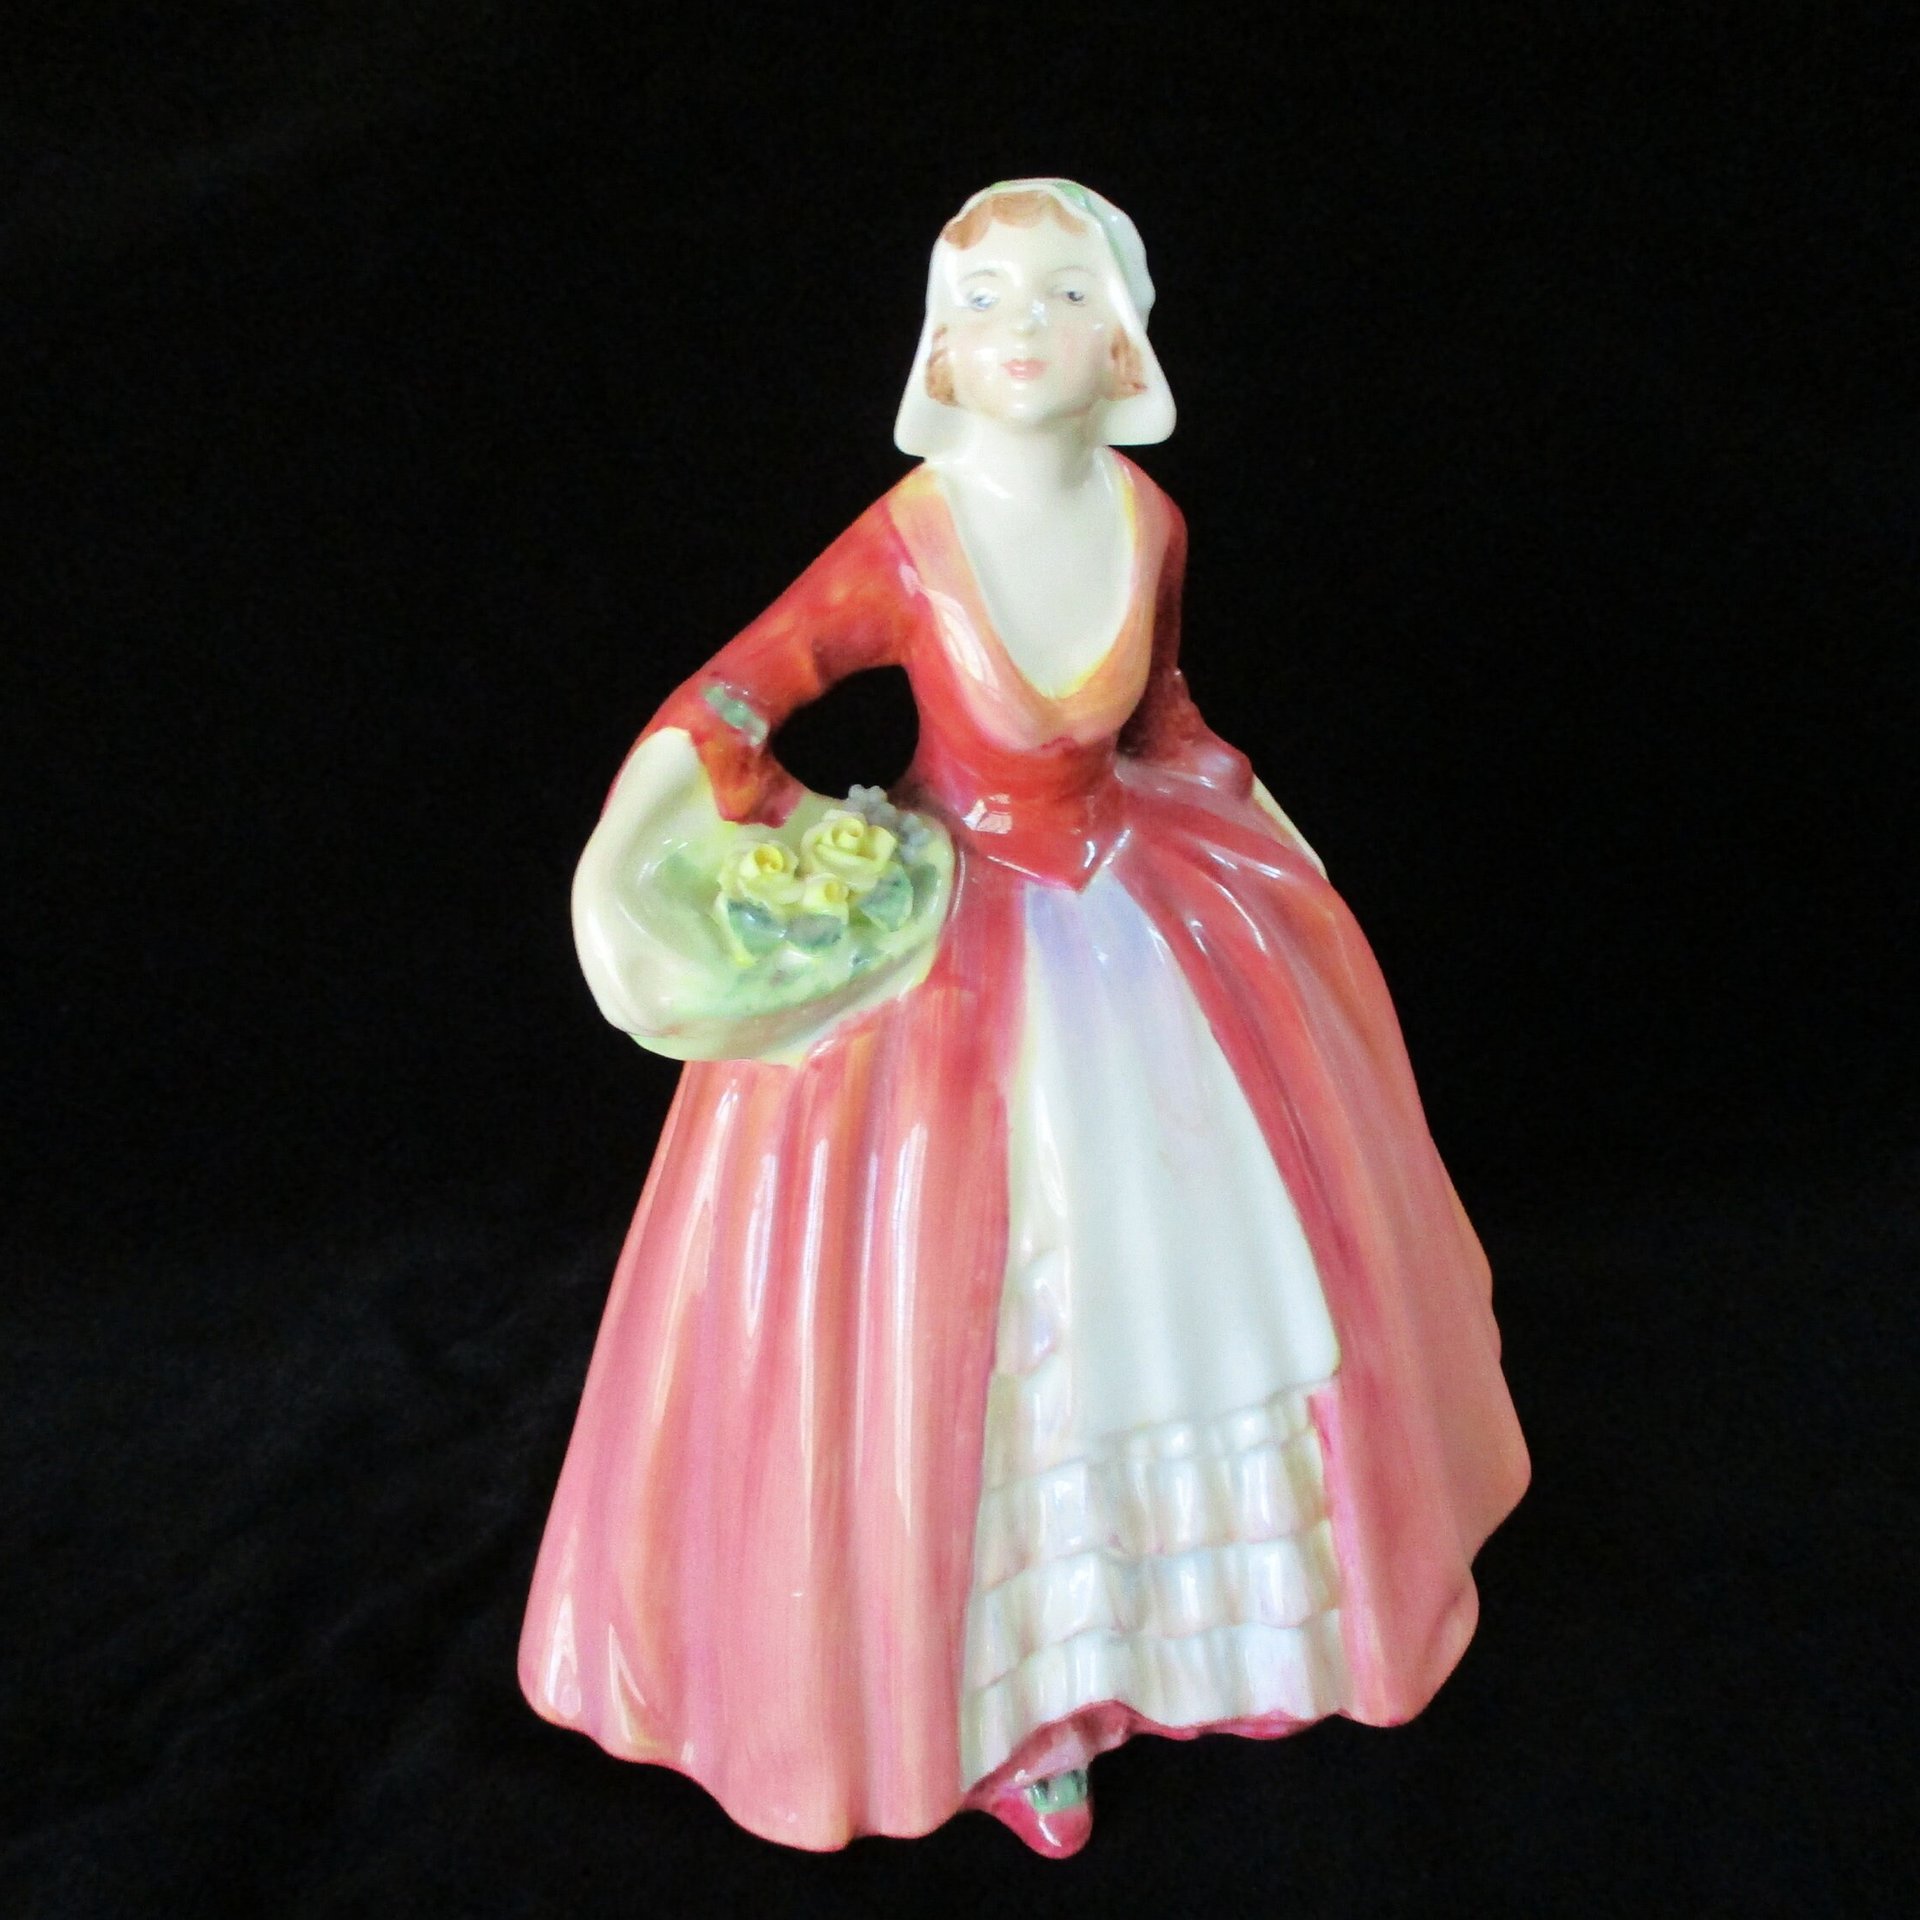 Royal Doulton Figurine, Janet, Retired, Made in England